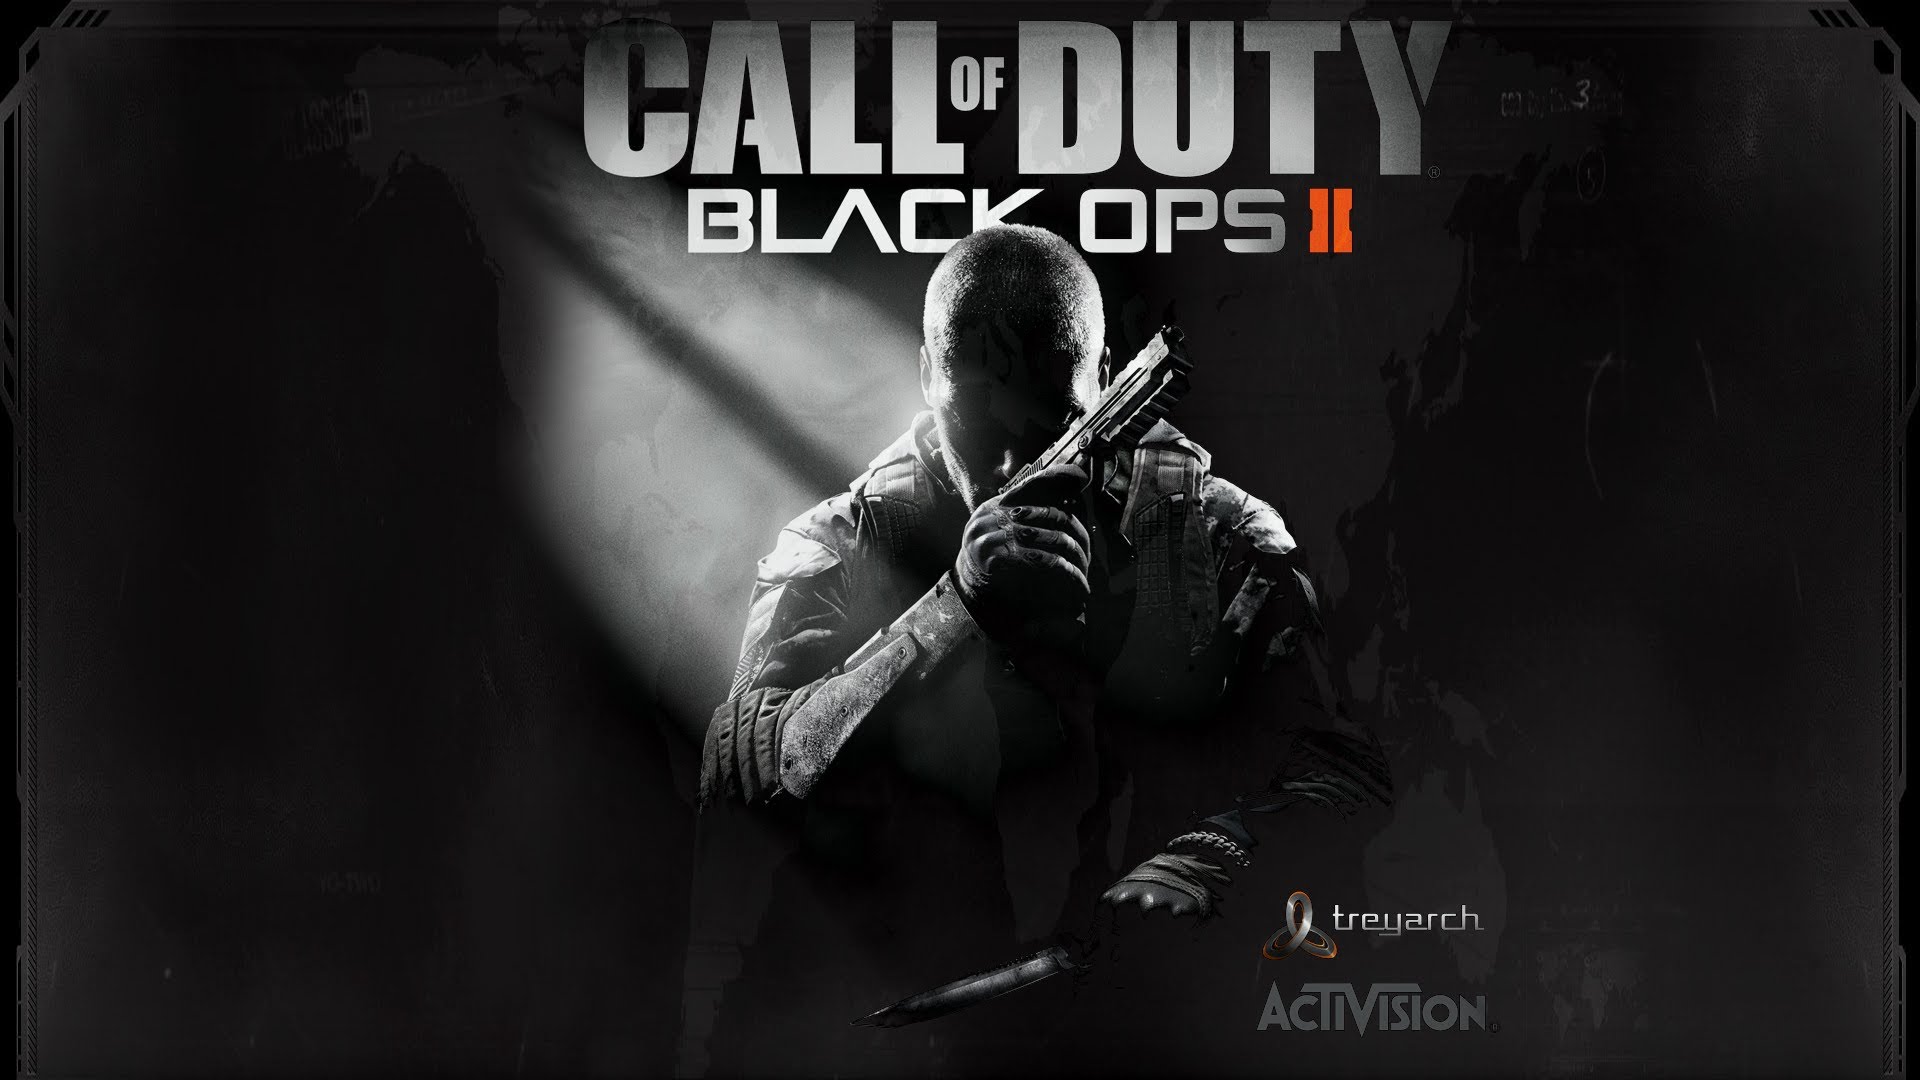 Call of Duty BO2 1 GameplayMission 1920x1080